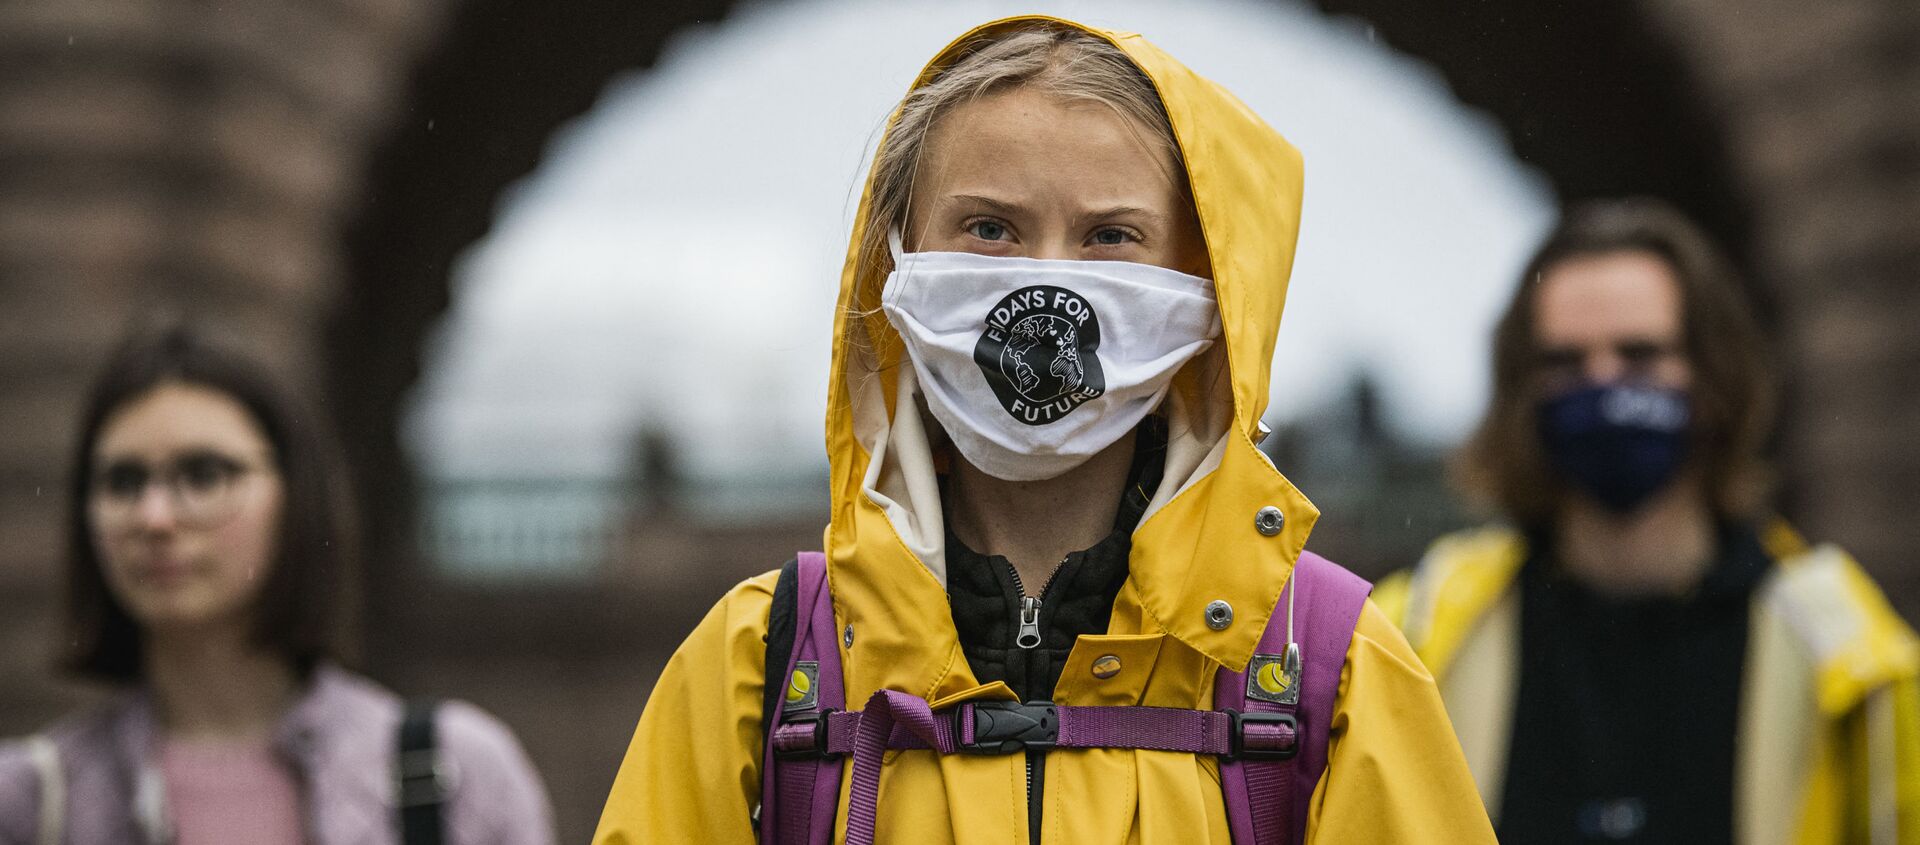 Swedish climate activist Greta Thunberg protests during a Fridays for Future protest in front of the Swedish Parliament Riksdagen in Stockholm on October 9, 2020 - Sputnik International, 1920, 05.02.2021